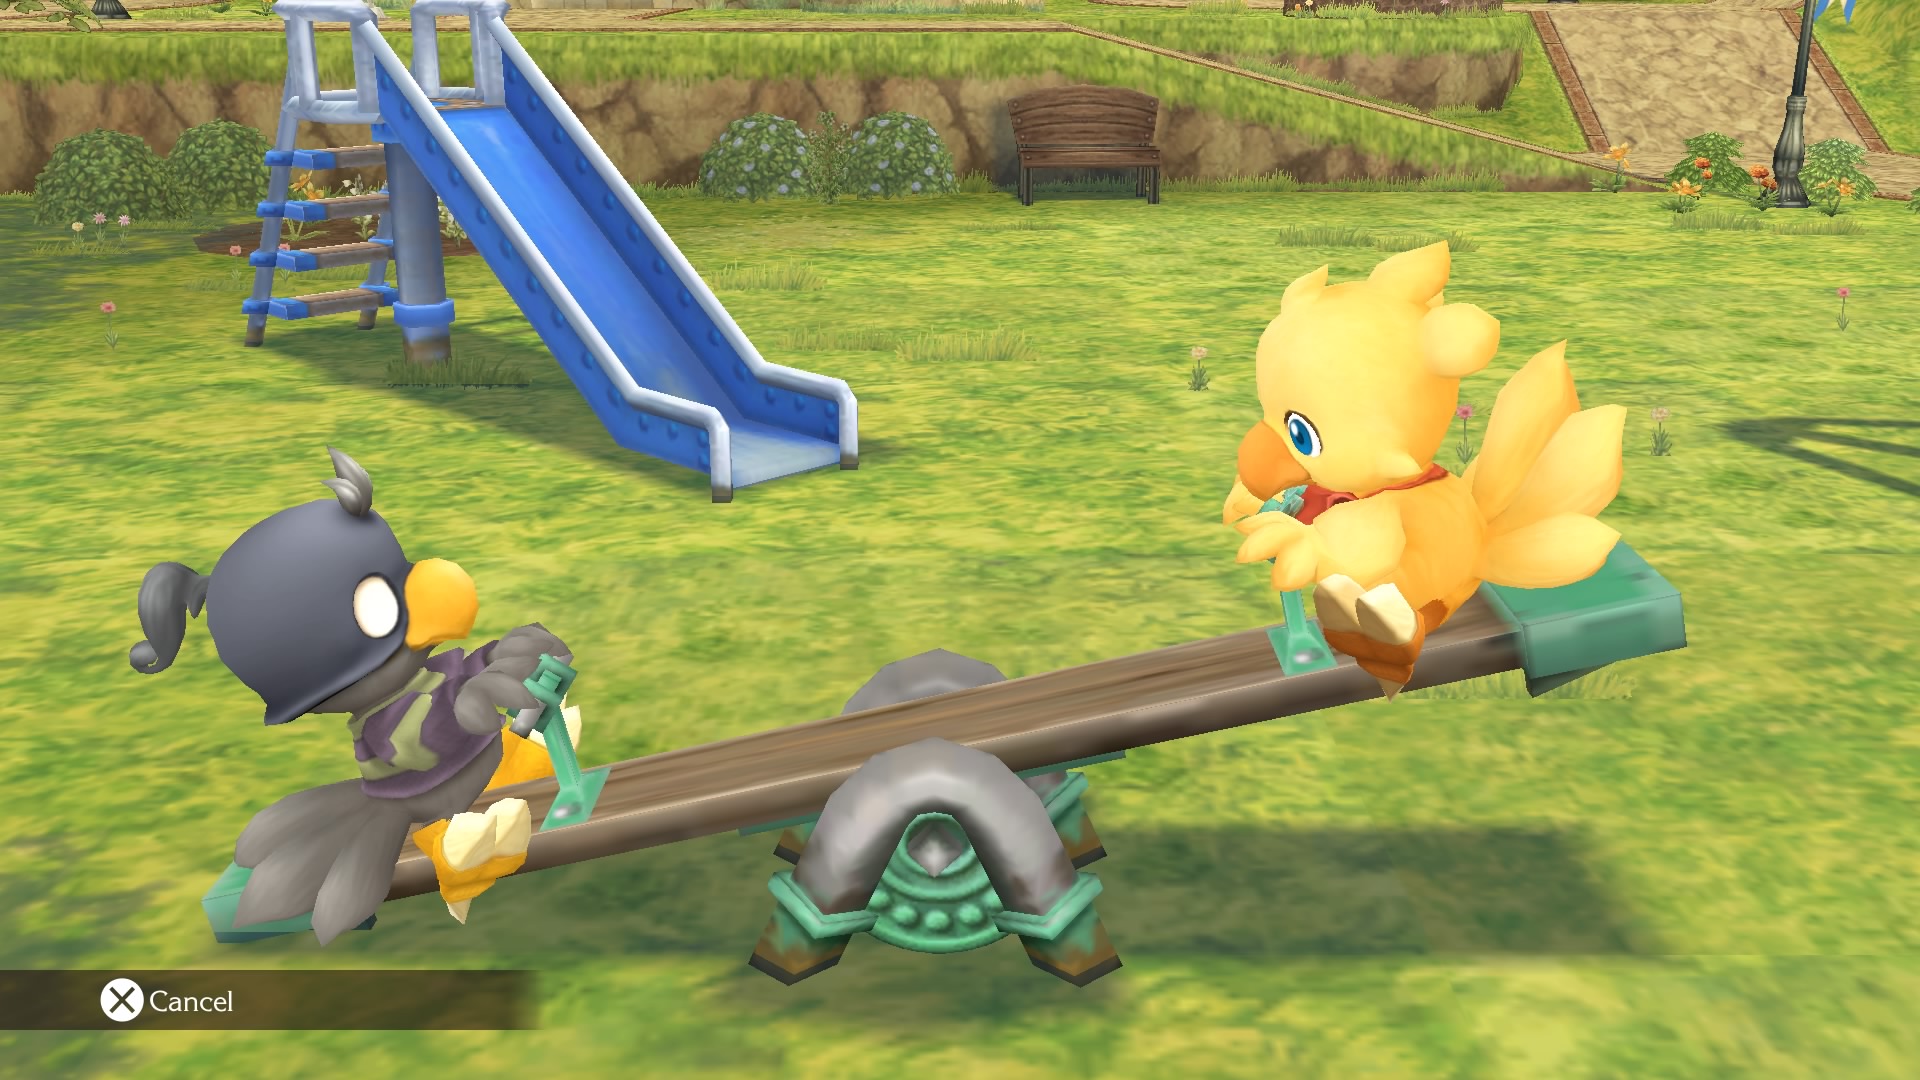 Chocobo’s Mystery Dungeon Every Buddy PS4 Review